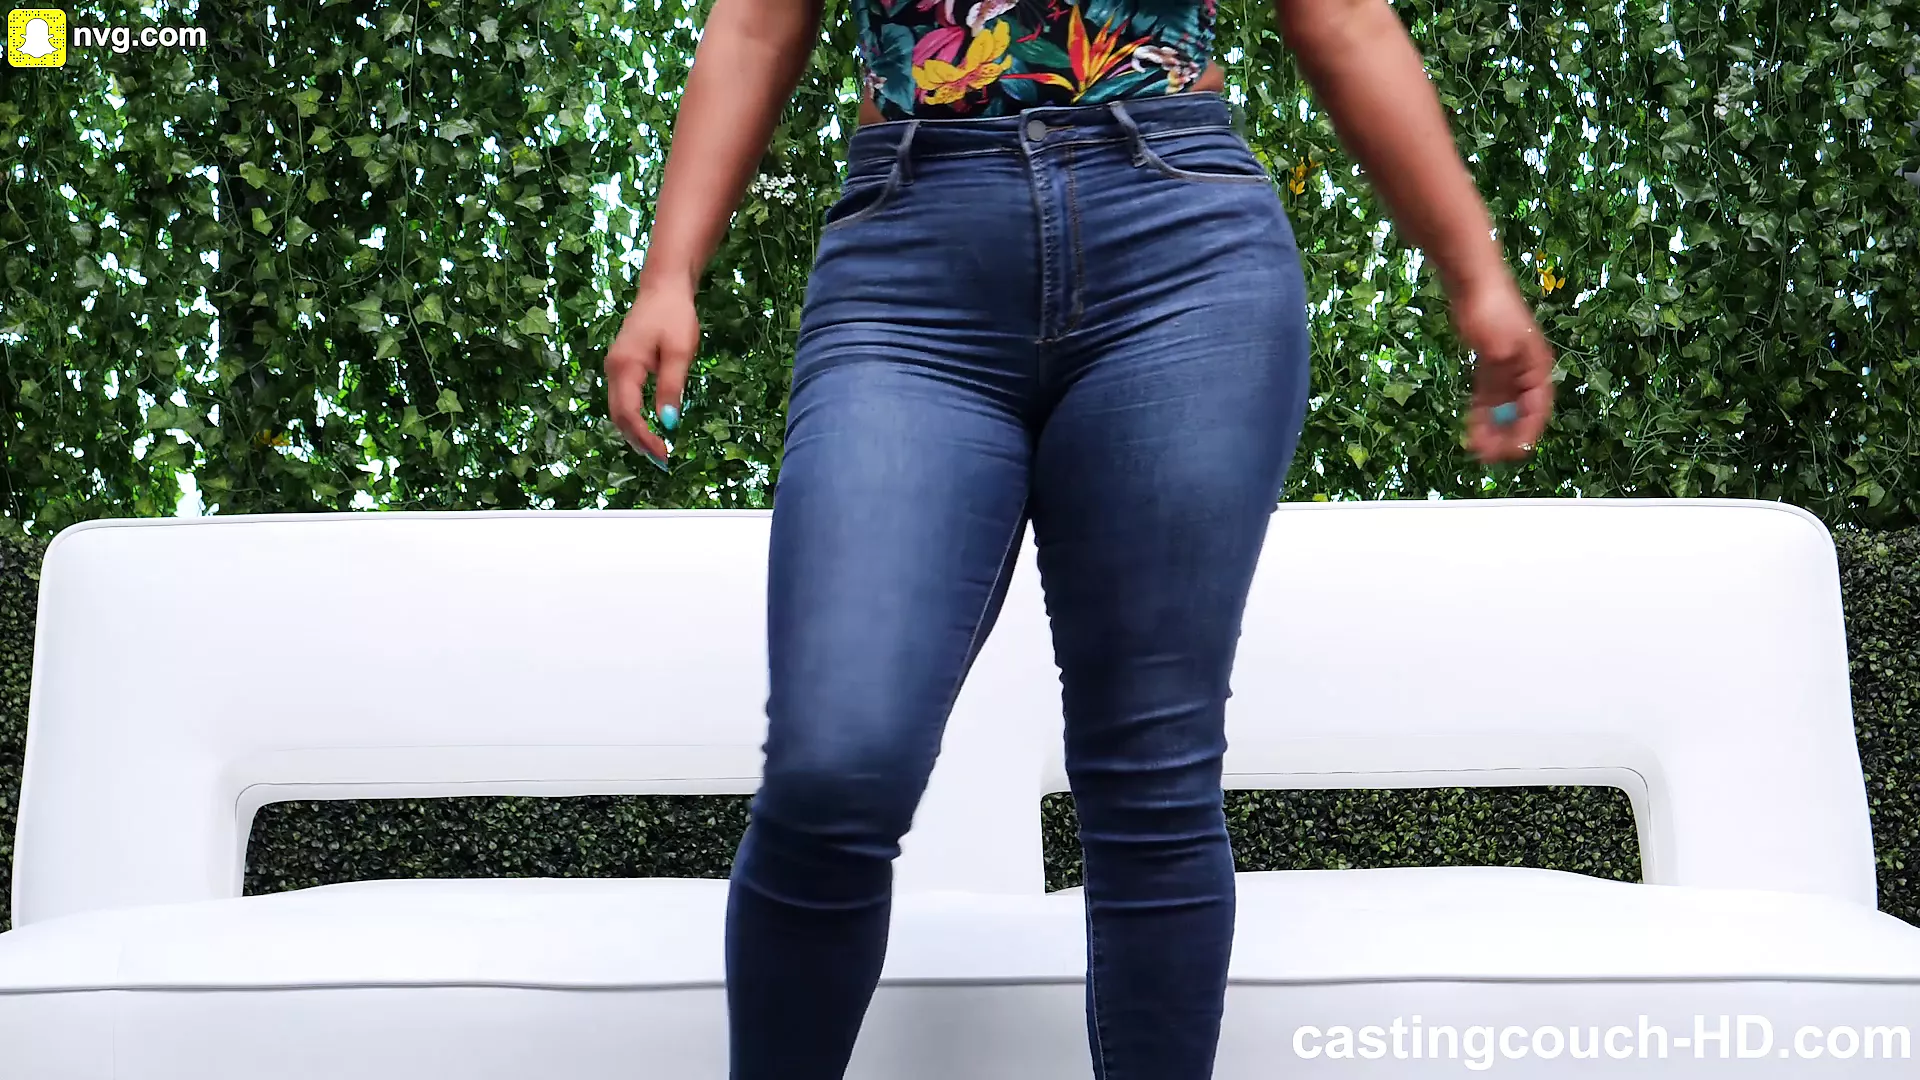 PAWG MILF Pounded During Rap Video Audition photo photo